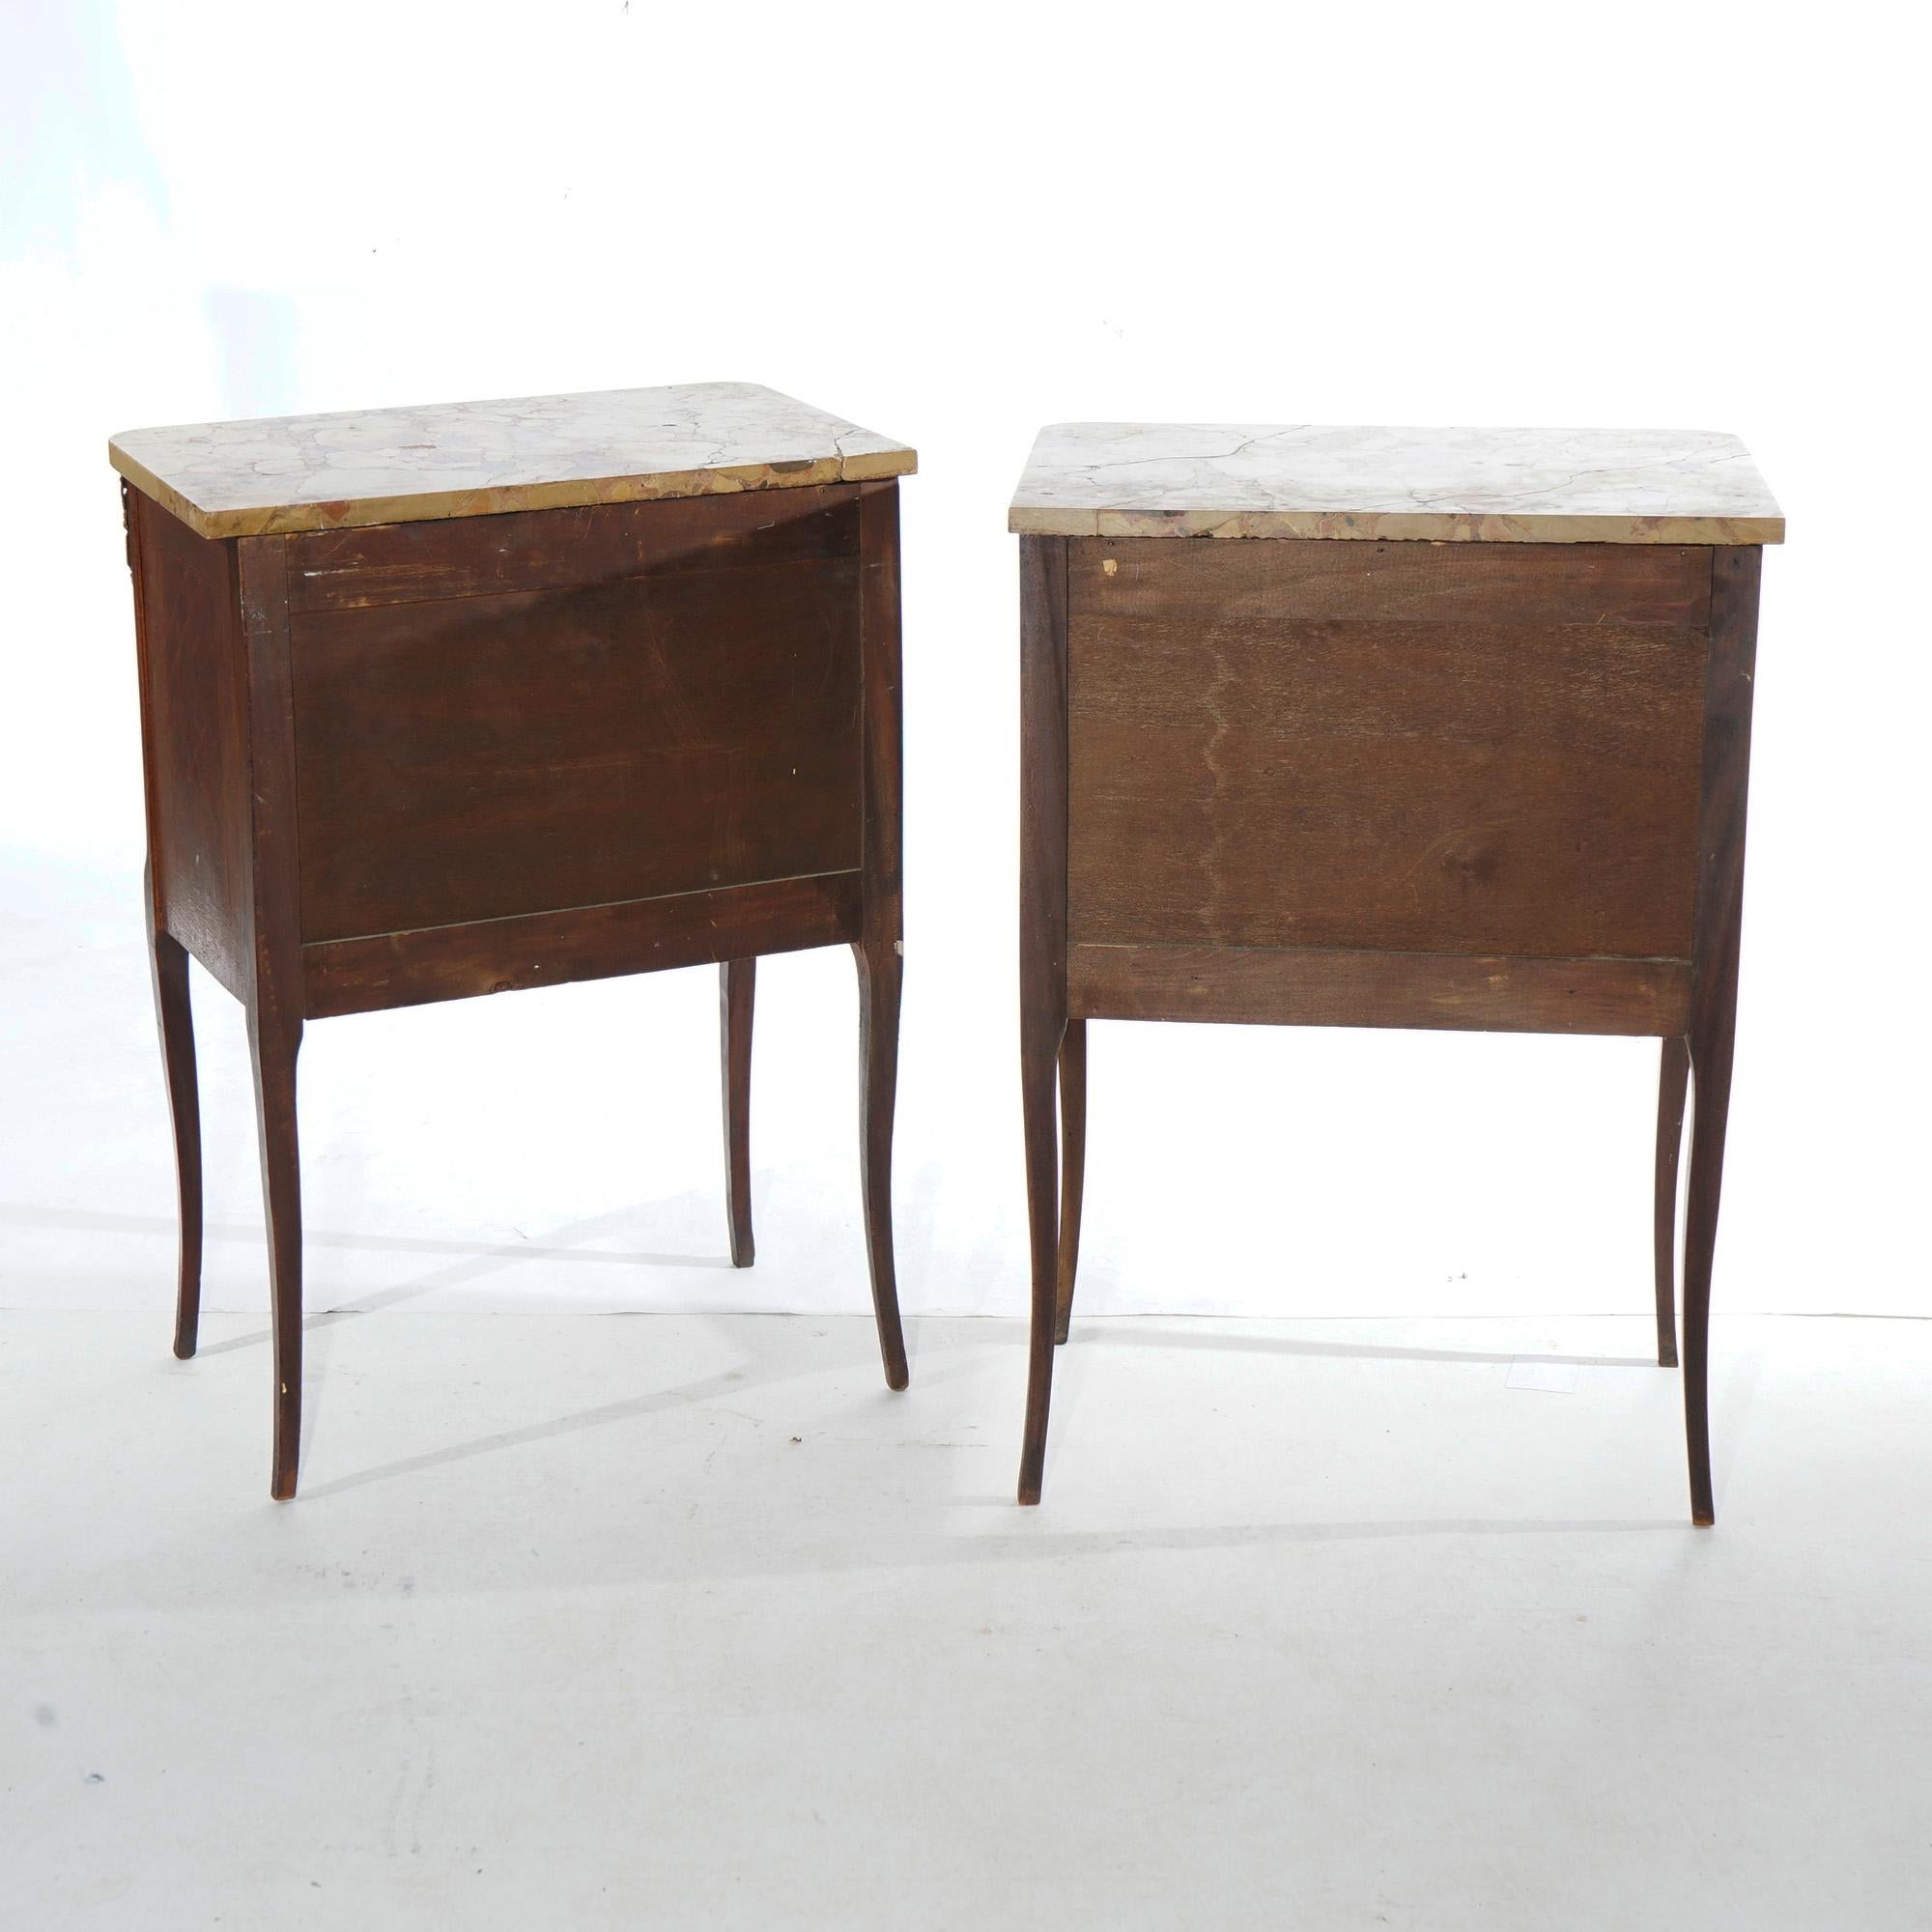 Antique Pair French Kingwood Satinwood Inlaid Marble Top Side Tables circa 1910 In Good Condition For Sale In Big Flats, NY